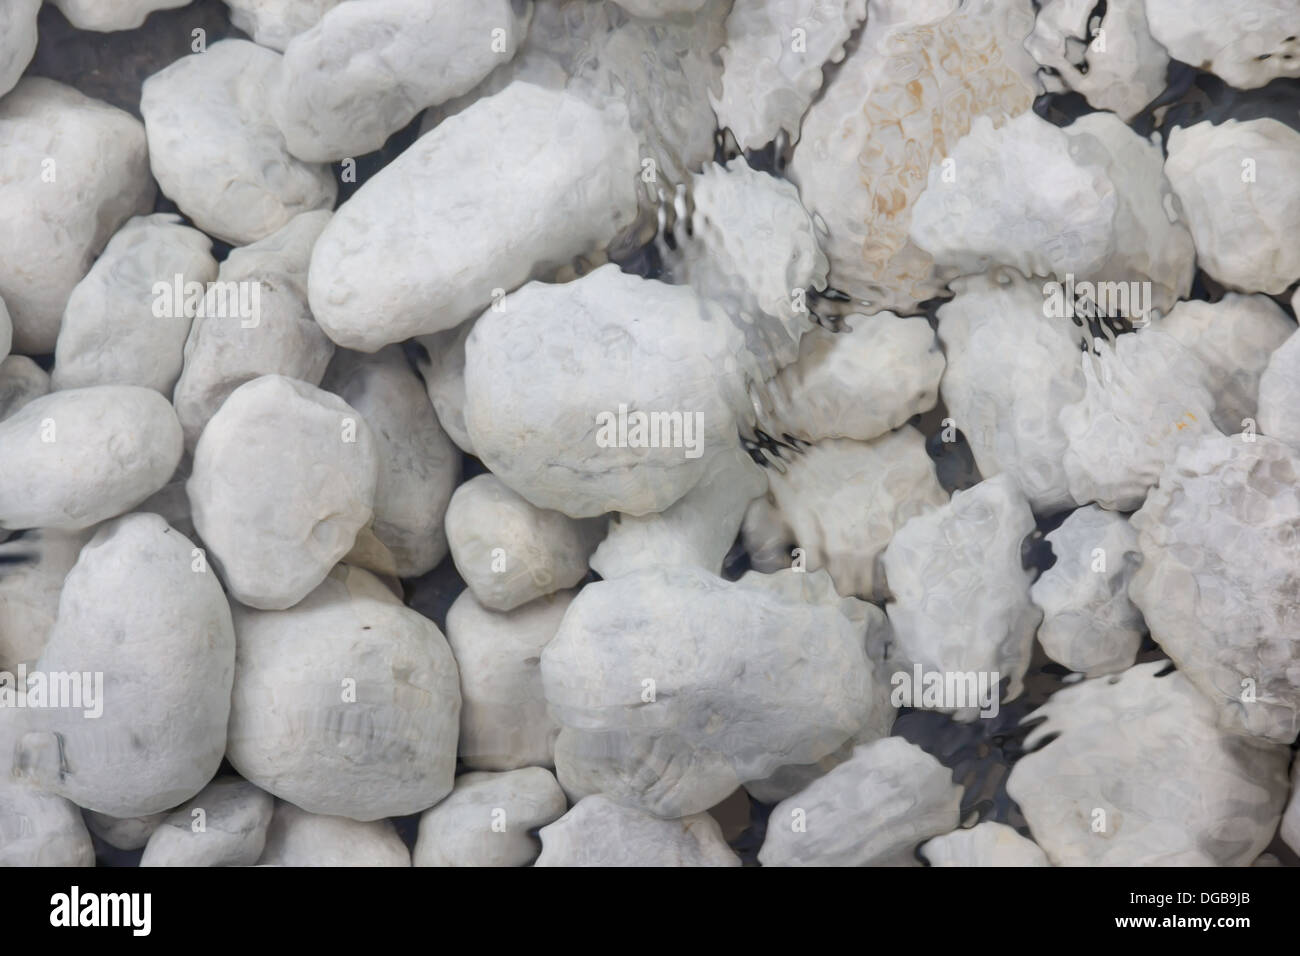 A picture of a bunch of white stones in shallow water Stock Photo